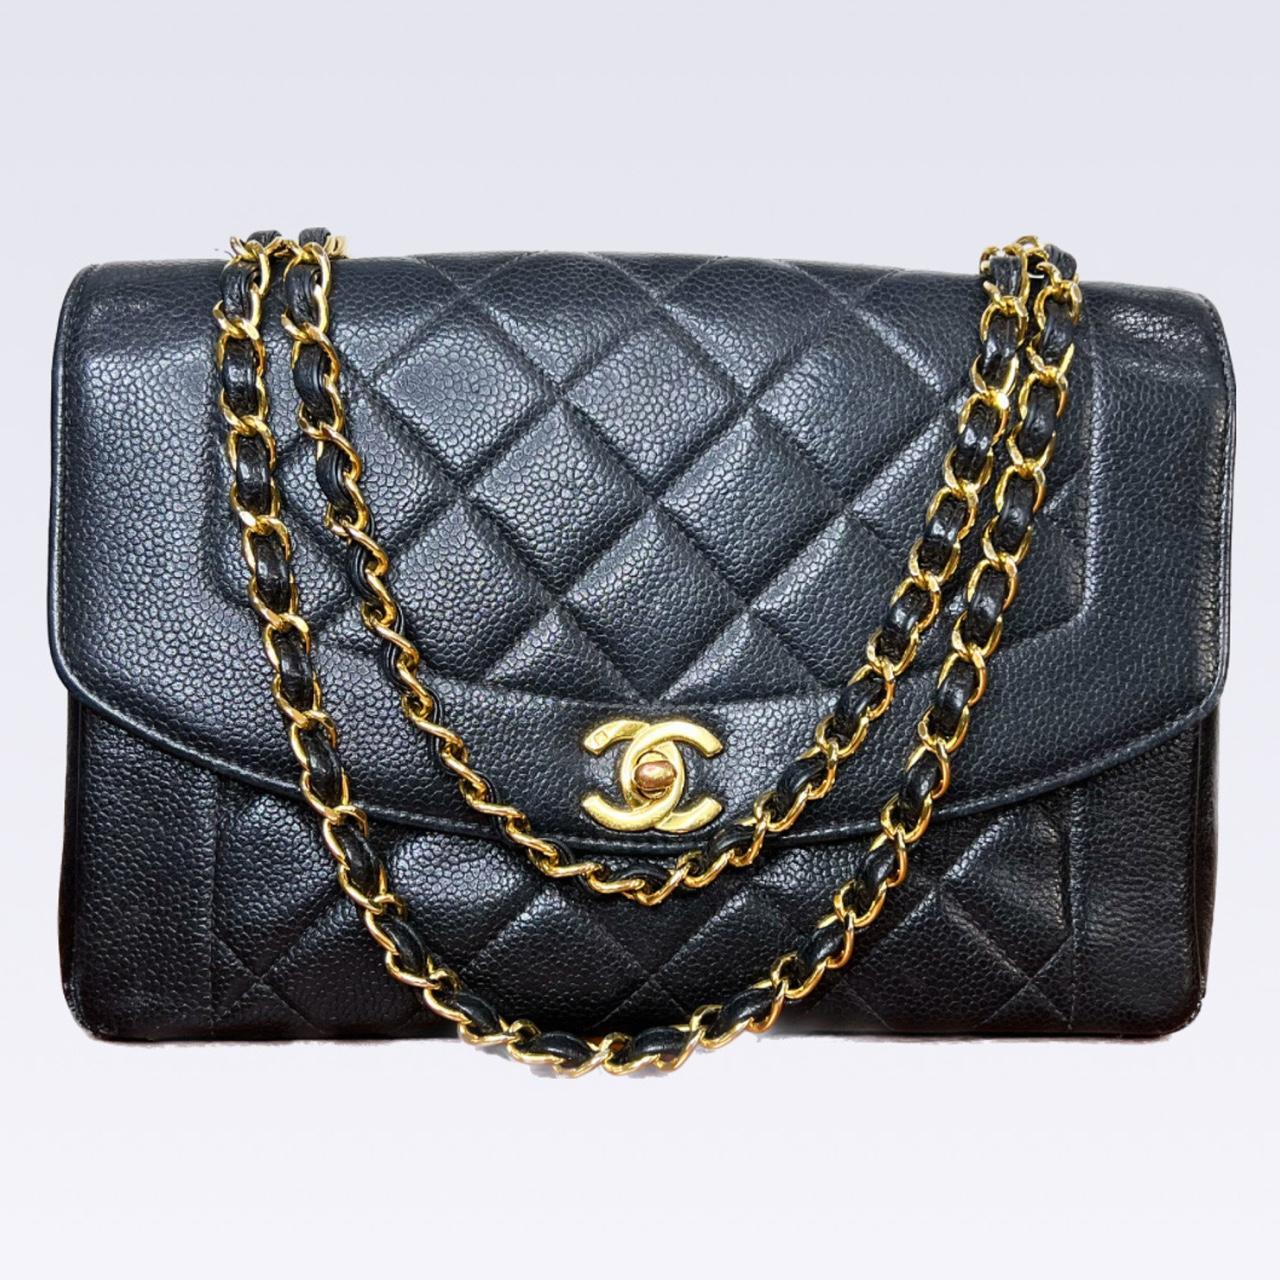 How to Tell If Your Chanel Bag Is Authentic | Love Luxury